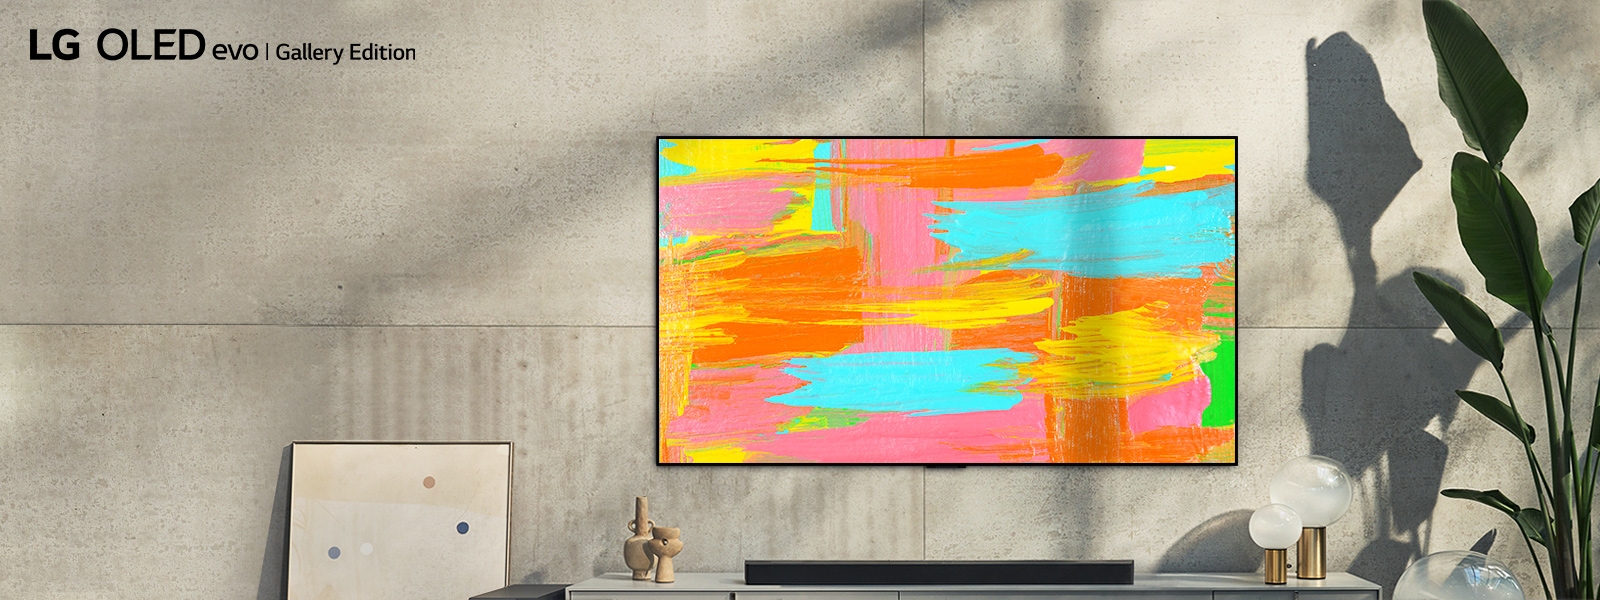 An image of LG OLED G2 hung on the wall of a minimalist gray room with a bright and vibrant abstract artwork displayed on the screen. The words "Make life a masterpiece" are displayed over the image.